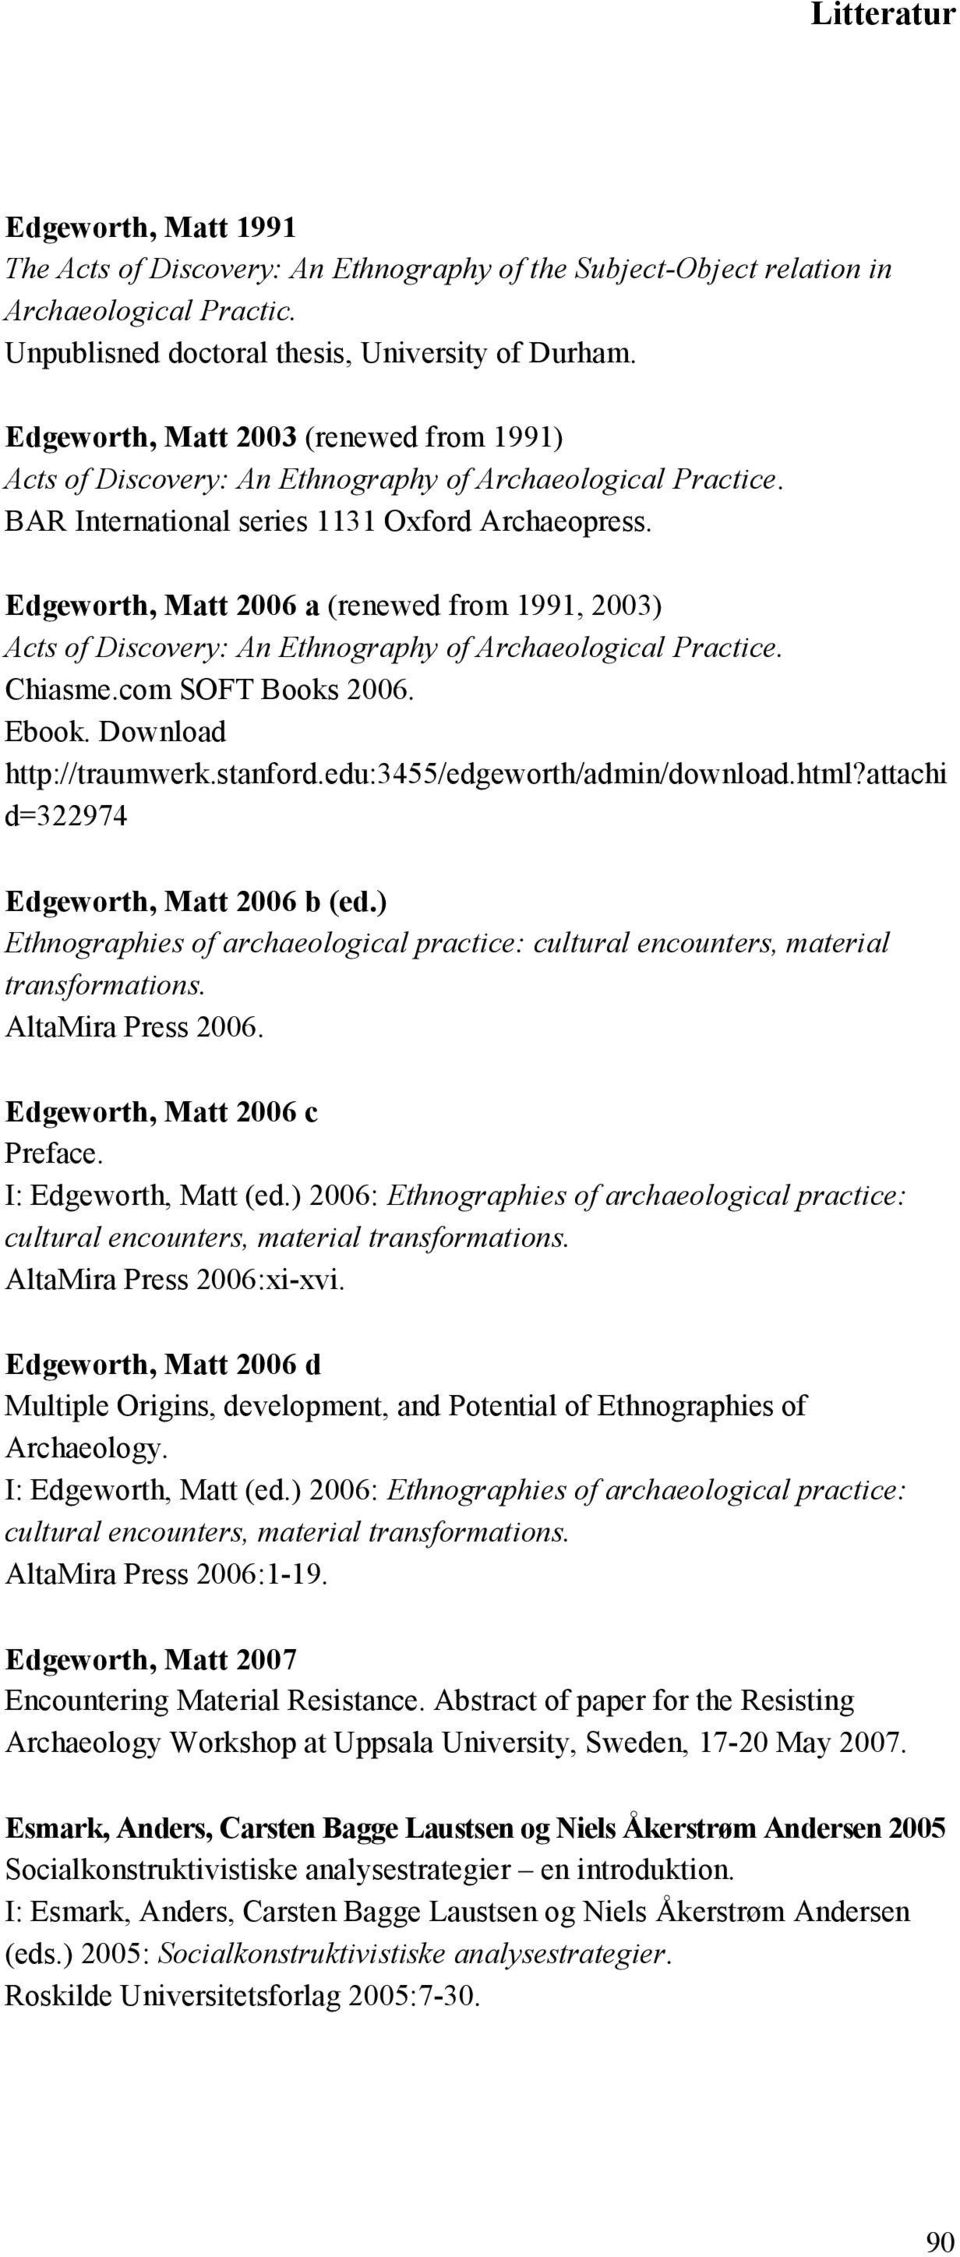 Edgeworth, Matt 2006 a (renewed from 1991, 2003) Acts of Discovery: An Ethnography of Archaeological Practice. Chiasme.com SOFT Books 2006. Ebook. Download http://traumwerk.stanford.